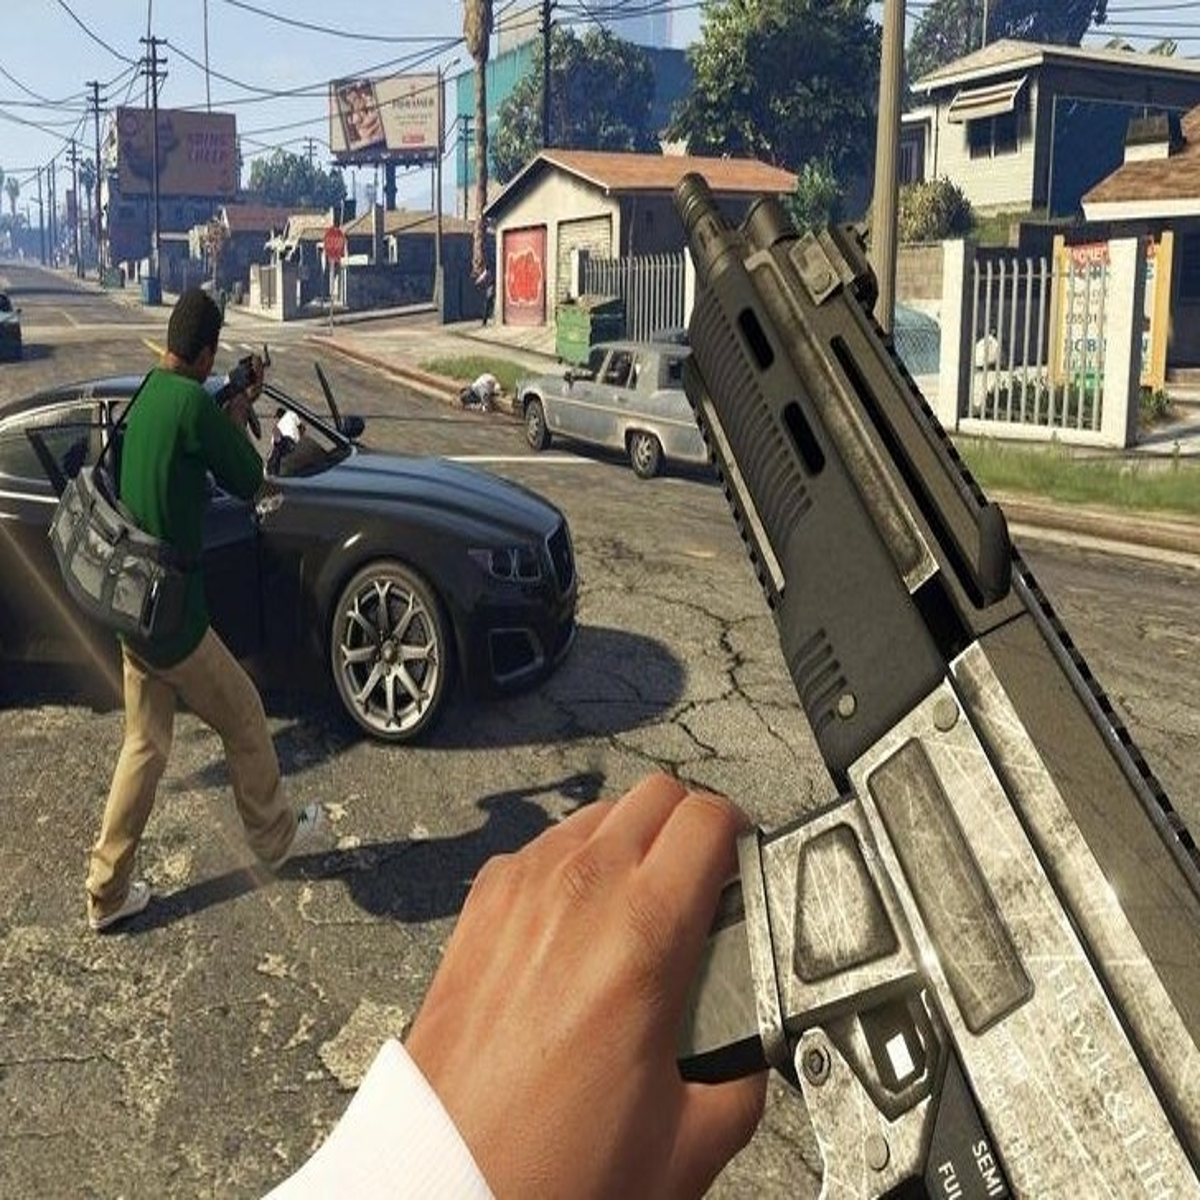 Grand Theft Auto 5 first-person mode confirmed for PC, PS4, Xbox One